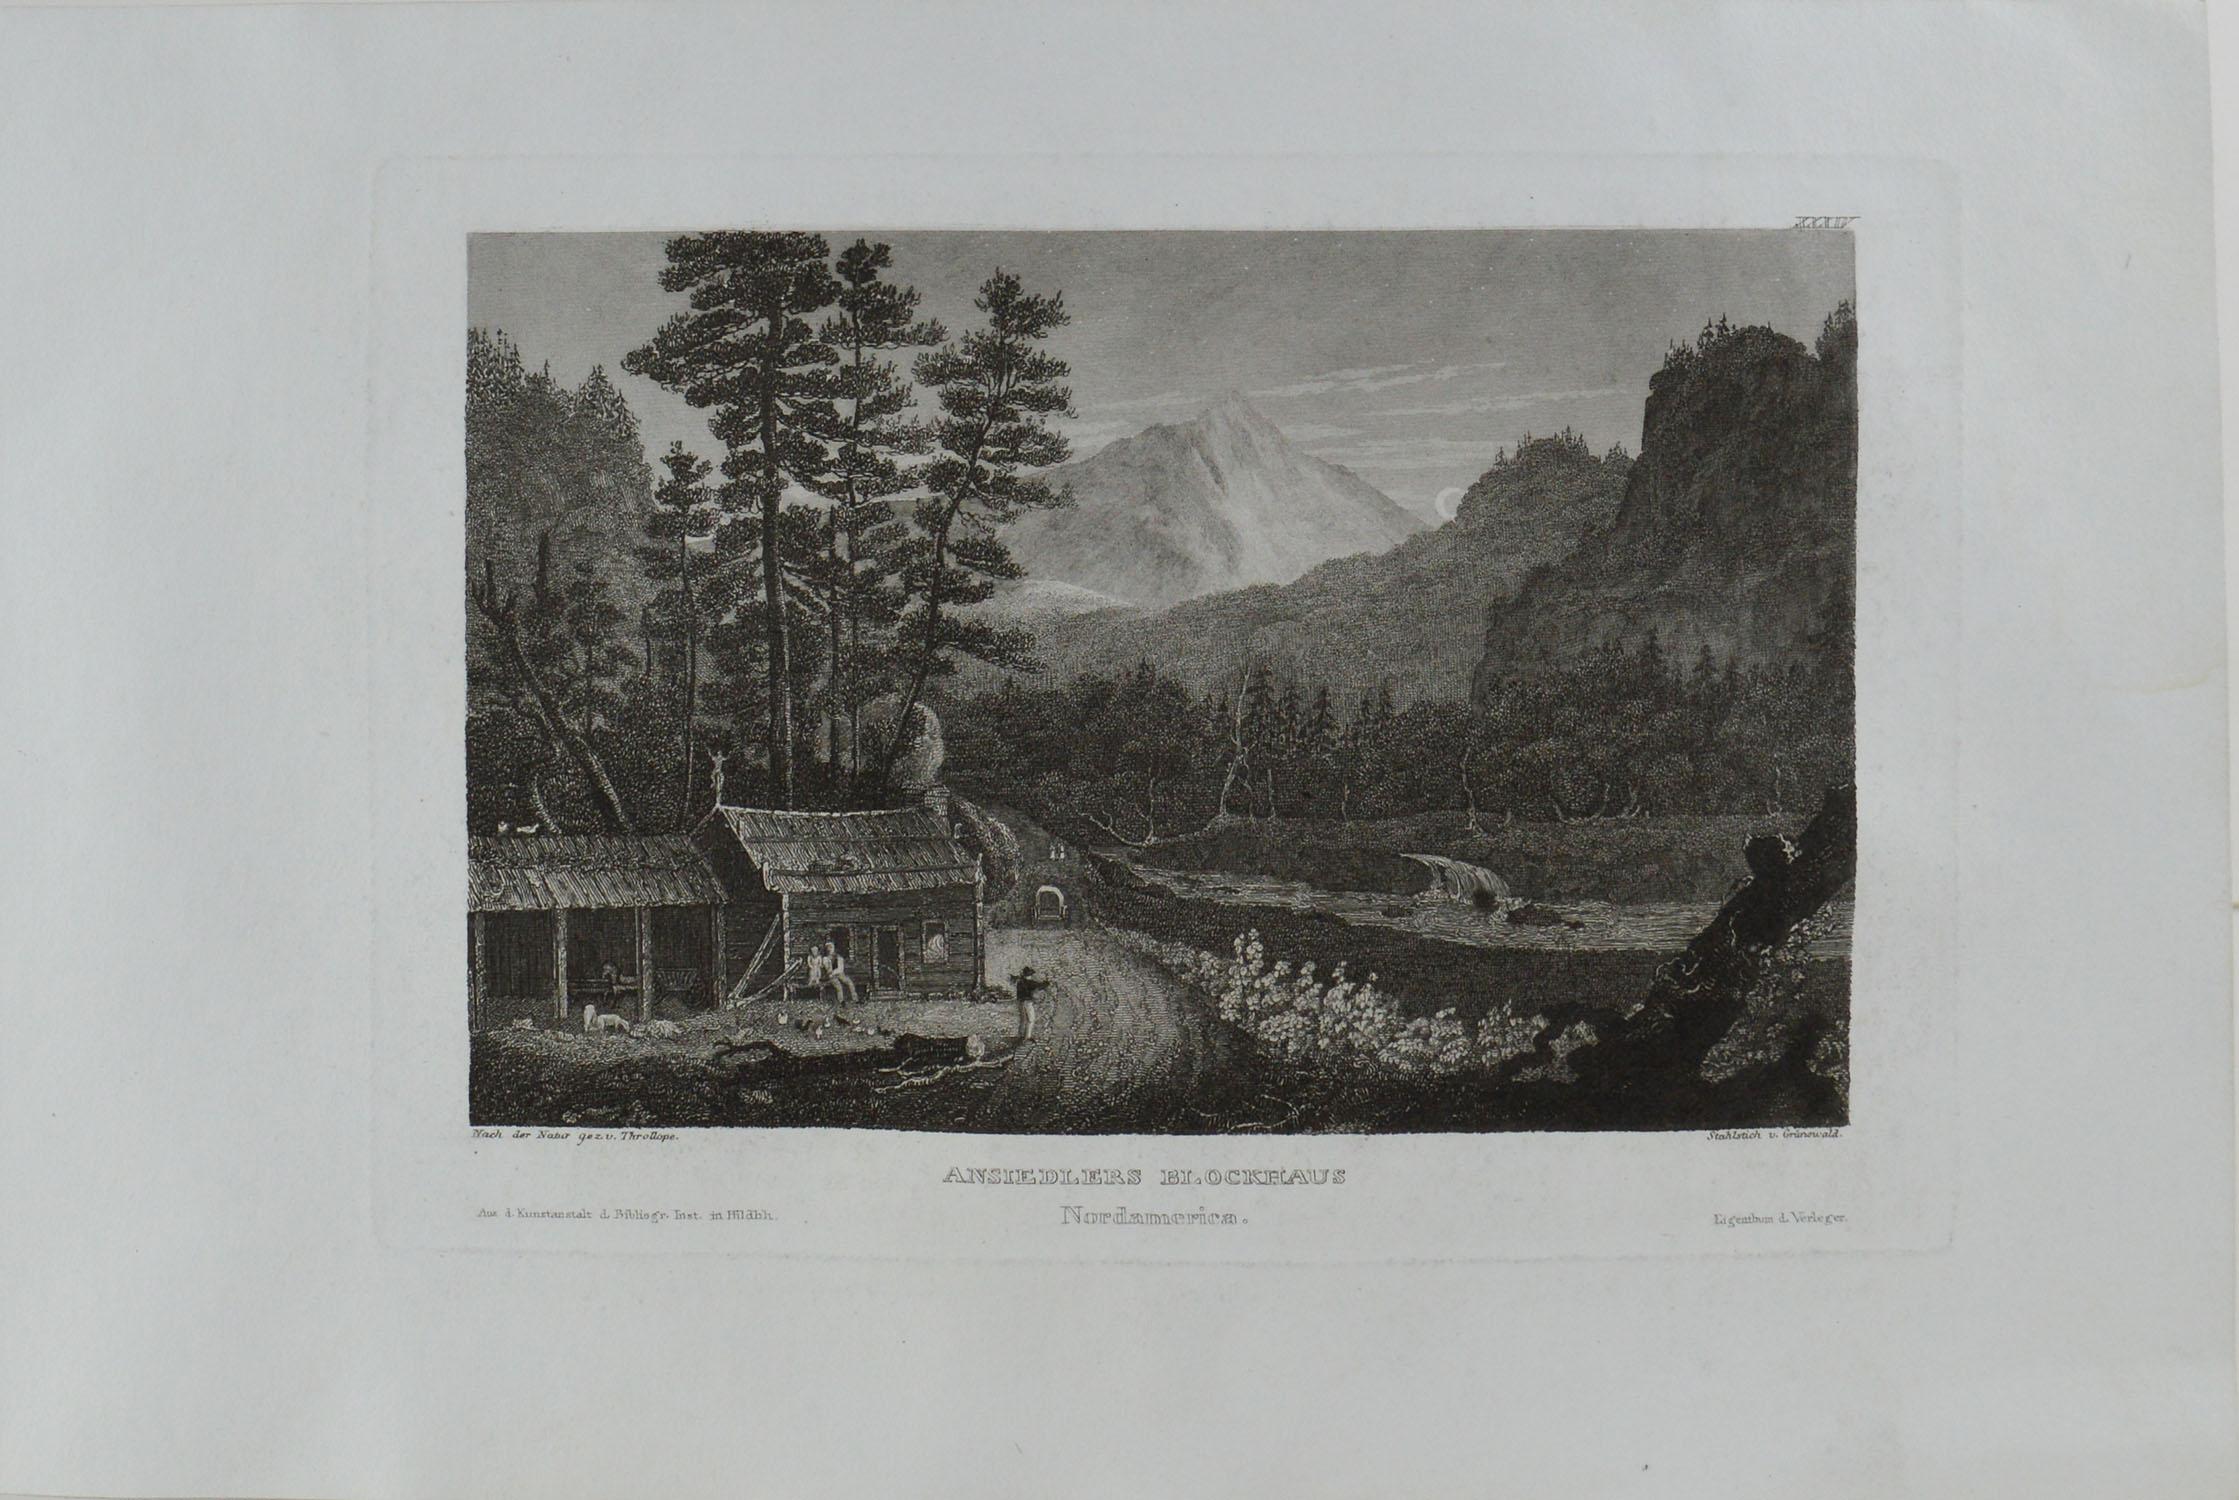 Great print of Ansiedlers Blockhouse, Pennsylvania

Steel engraving by Grunewald after Throllope

Published circa 1840

Unframed.
  